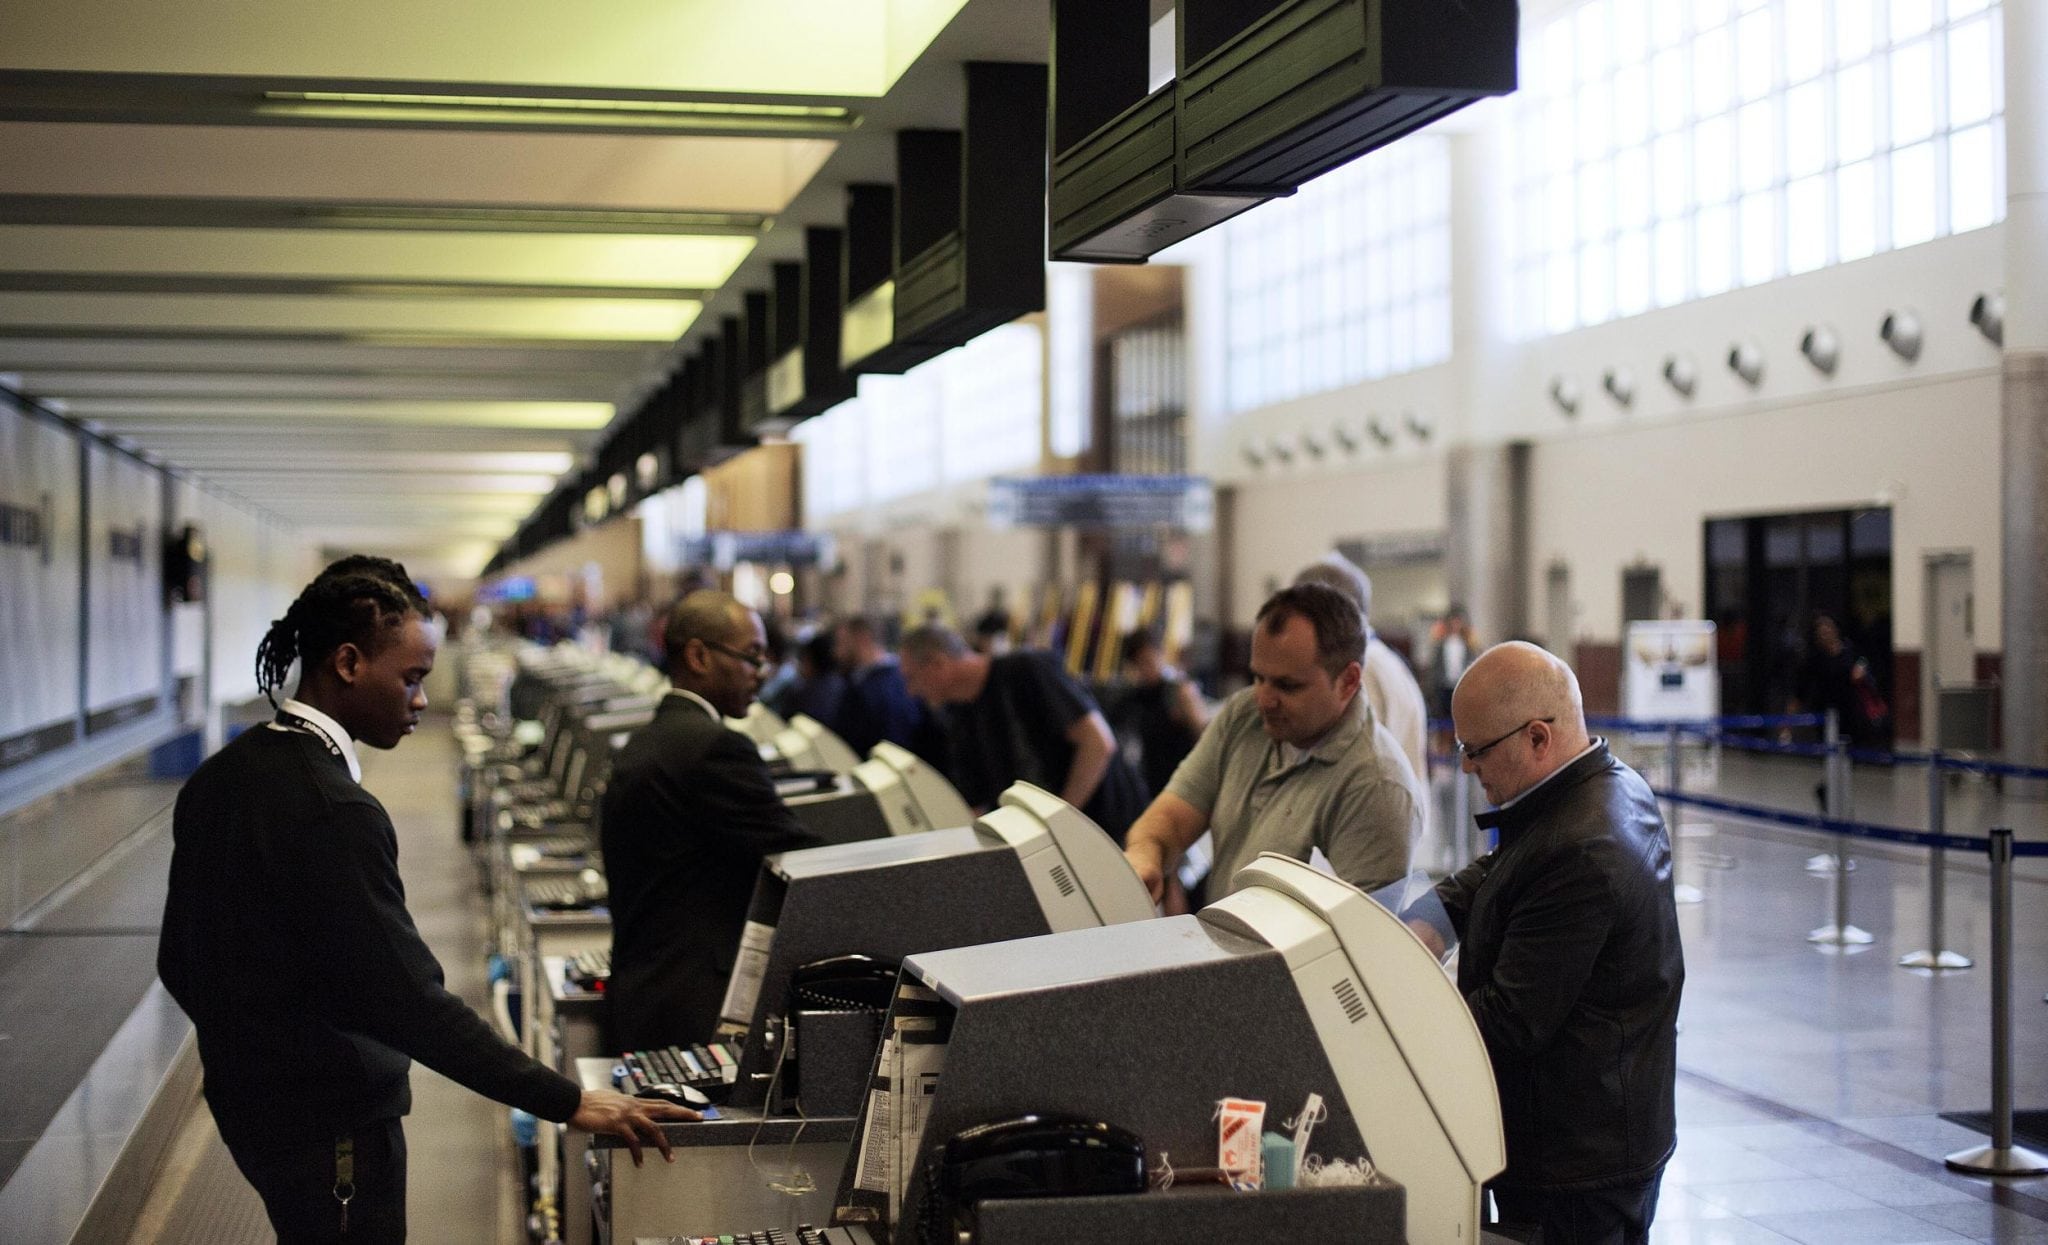 In this March 10, 2016 file photo, passengers check-in at the North terminal of the domestic passenger terminal at Hartsfield-Jackson Atlanta International Airport in Atlanta.